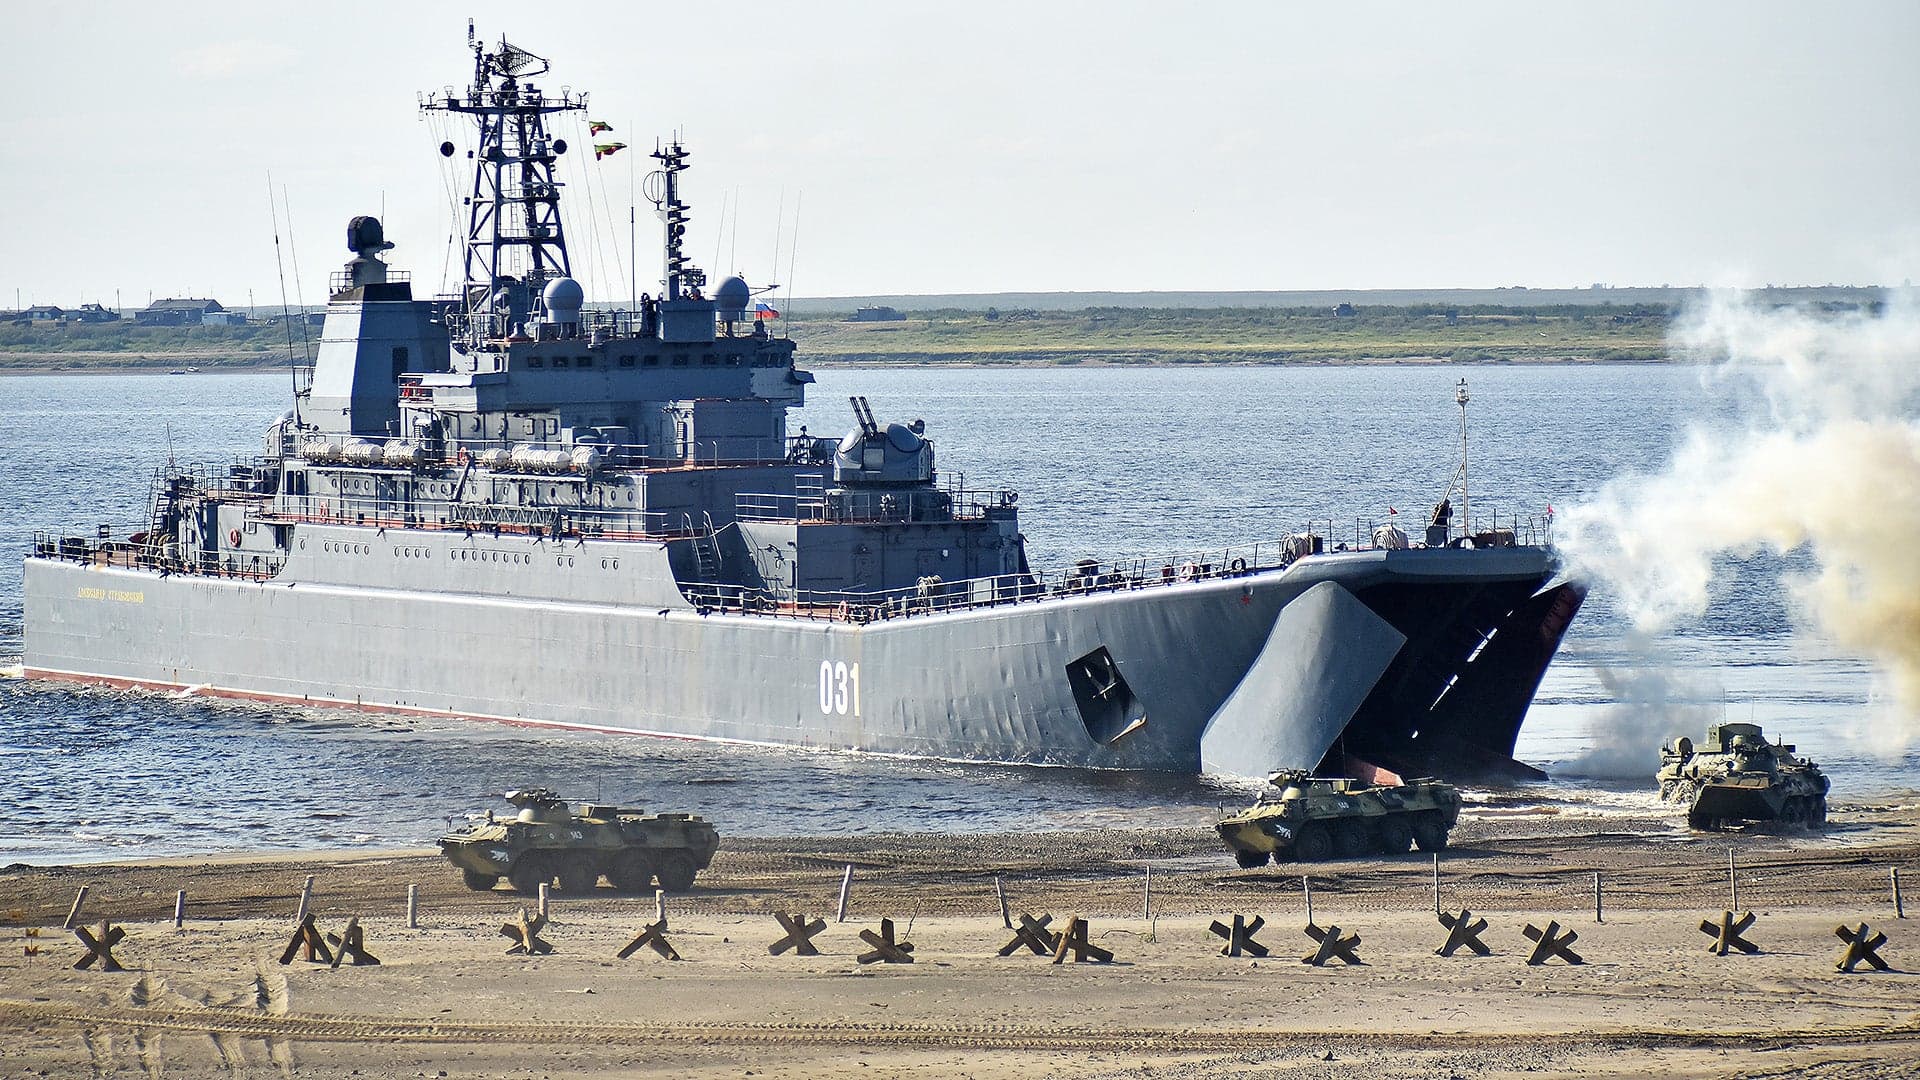 Russian Landing Ships Leave Baltic Sea Raising Concerns That Ukraine May Be Their Final Destination (Updated)